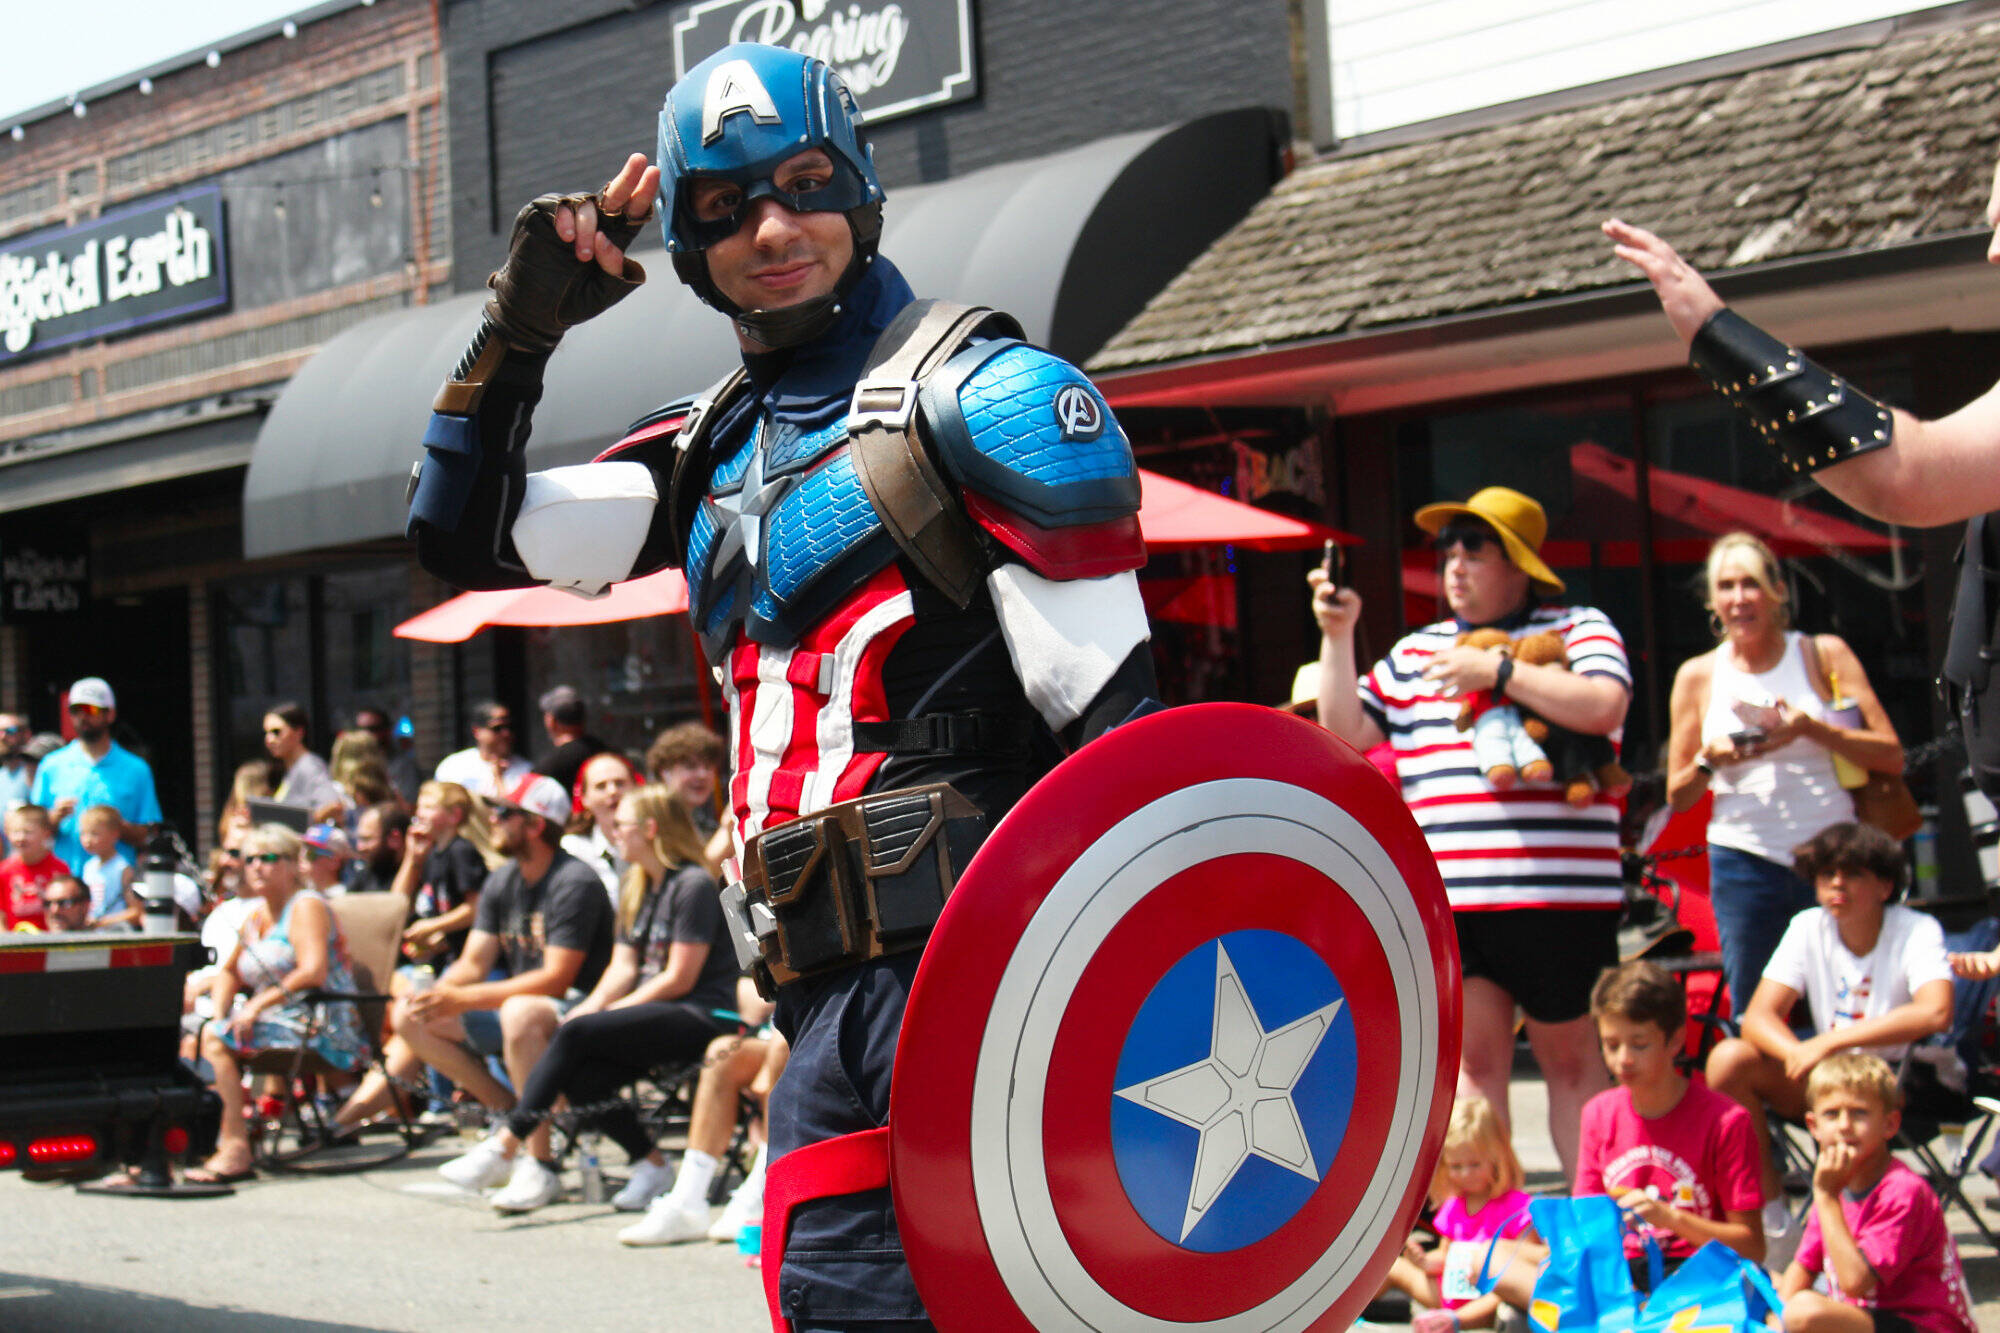 The Star Spangled Man with a Plan and other Avengers celebrated the Fourth of July by walking in the annual parade on Cole Street. Below are more photos from this year's event. Photos by Ray Miller-Still